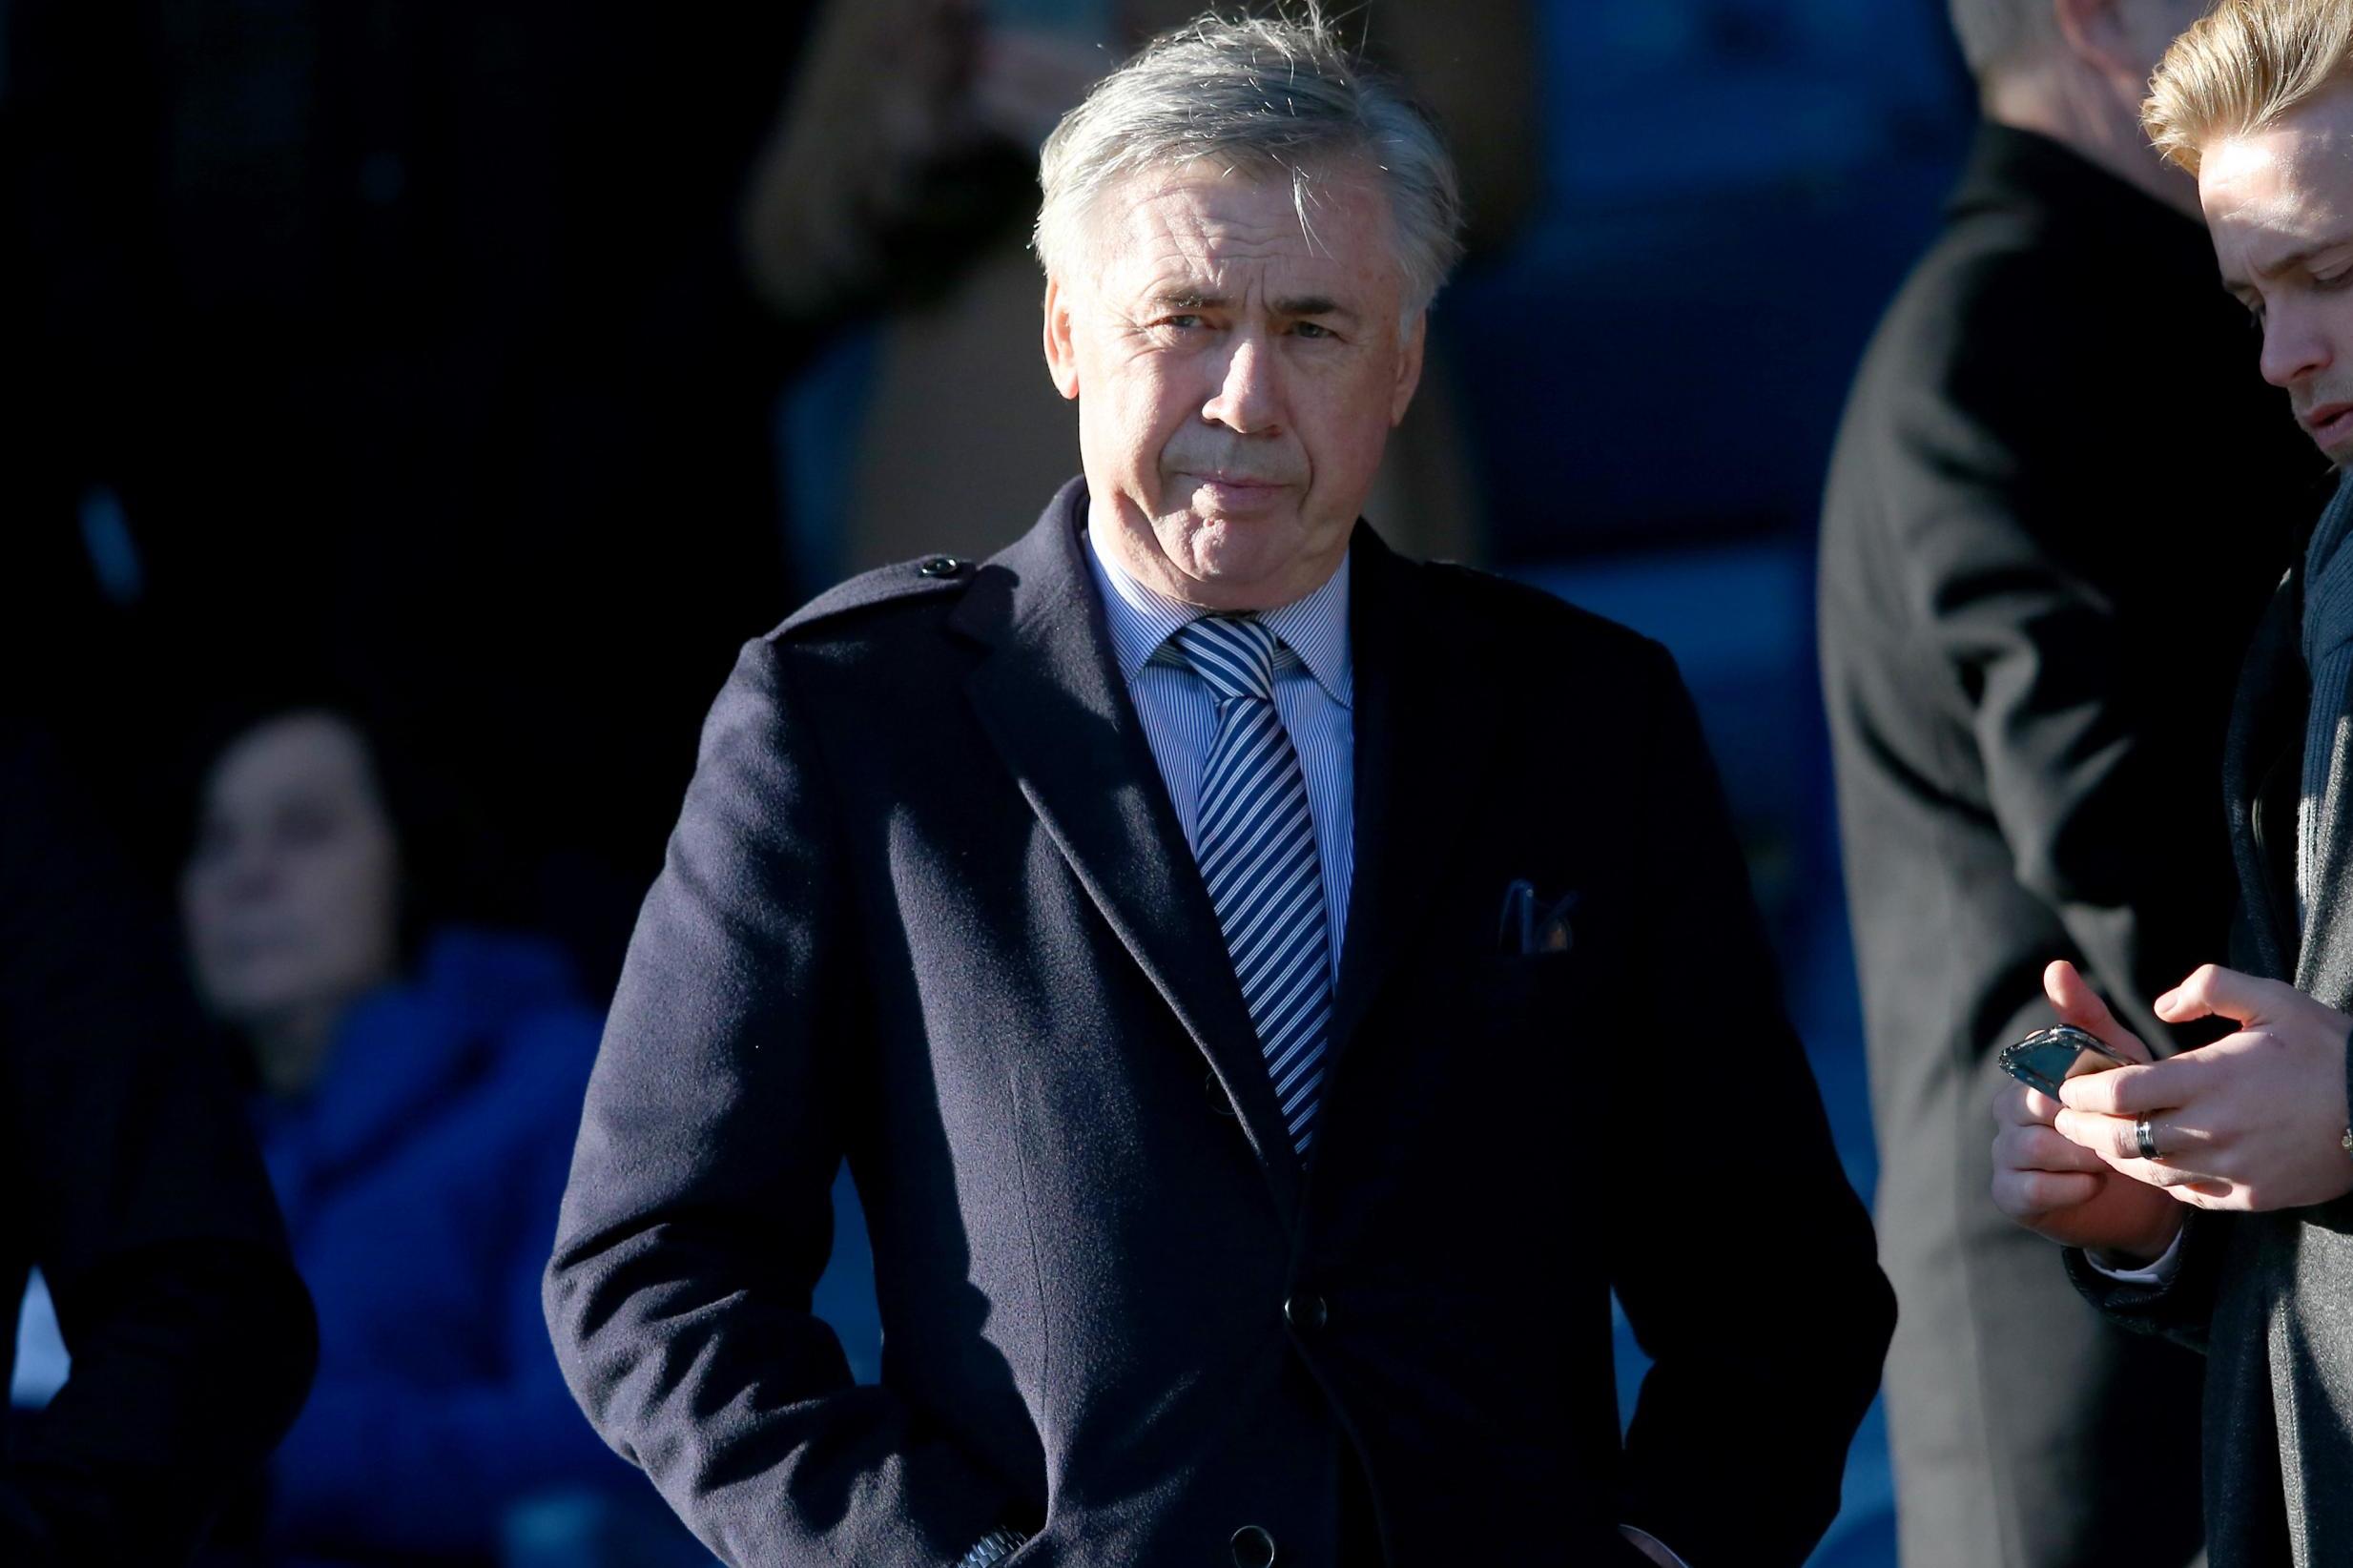 Carlo Ancelotti watched Everton play out a goalless draw with Arsenal on Saturday